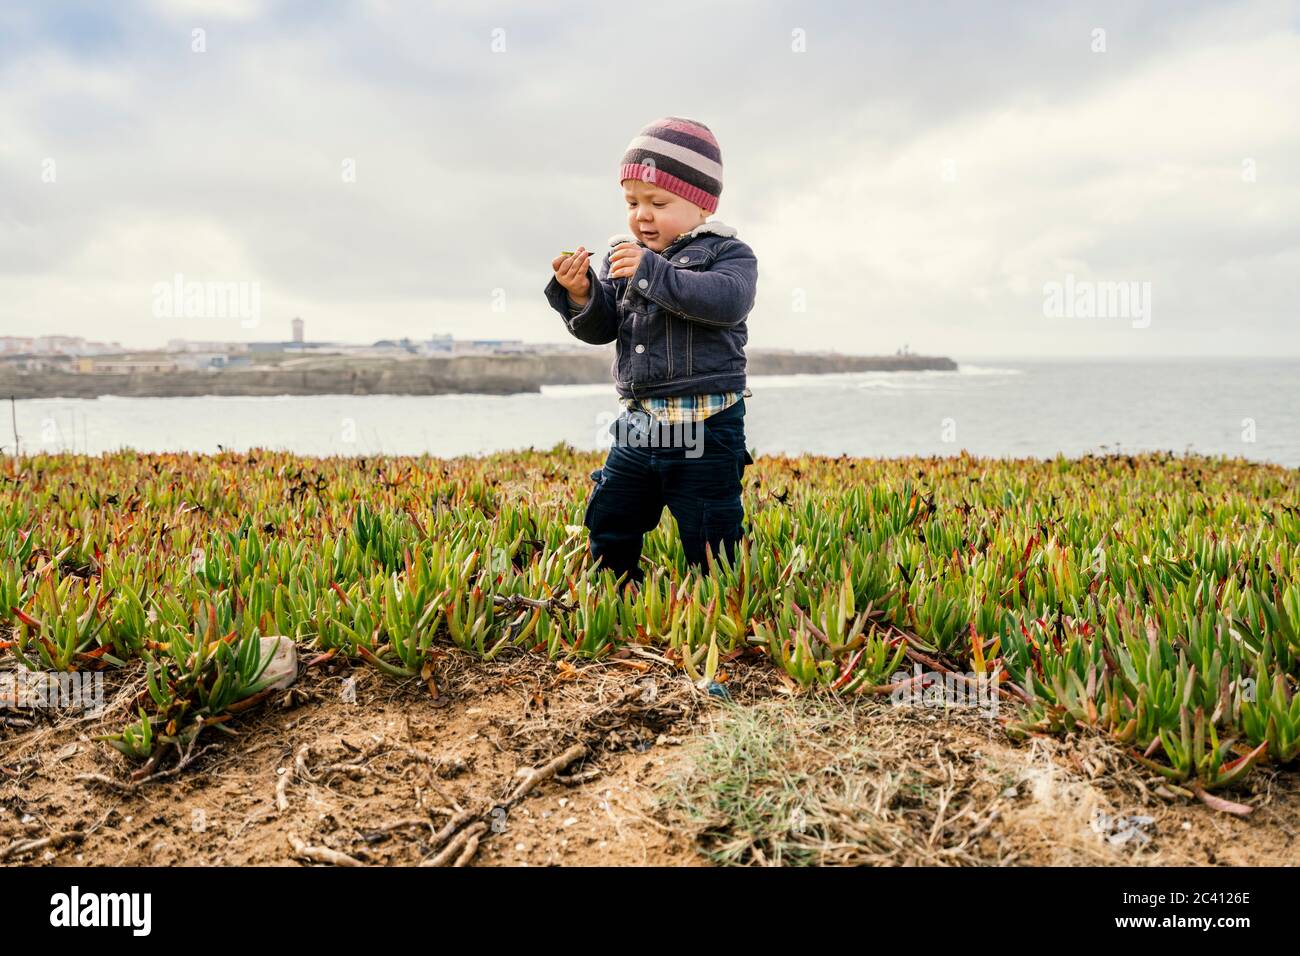 Toddler exploring nature on beautiful coast of Papoa islet in Peniche, Leiria district, Portugal Stock Photo